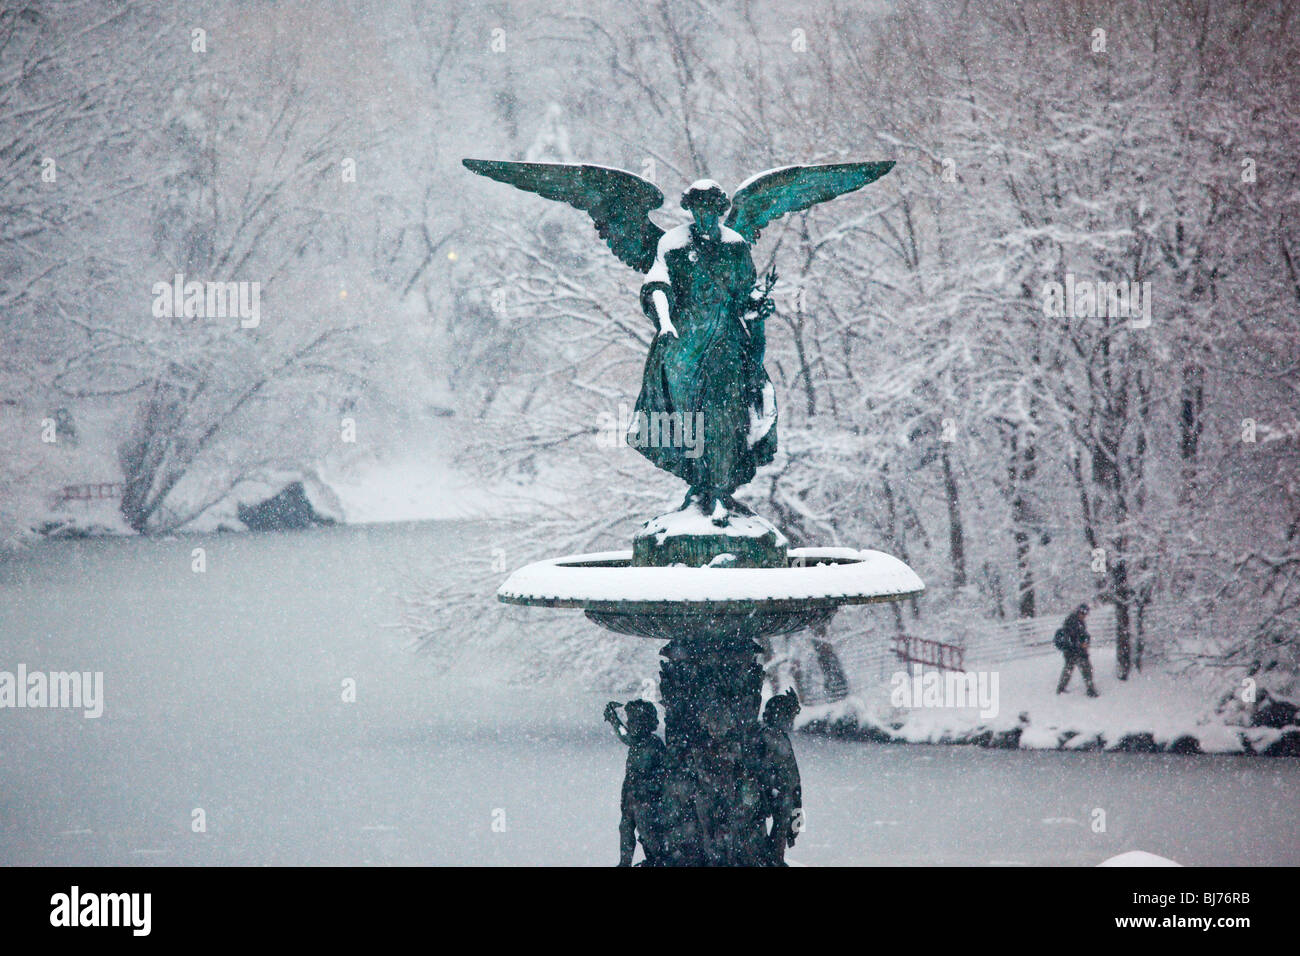 Bethesda Fountain in Central Park New York after snow storm 826276